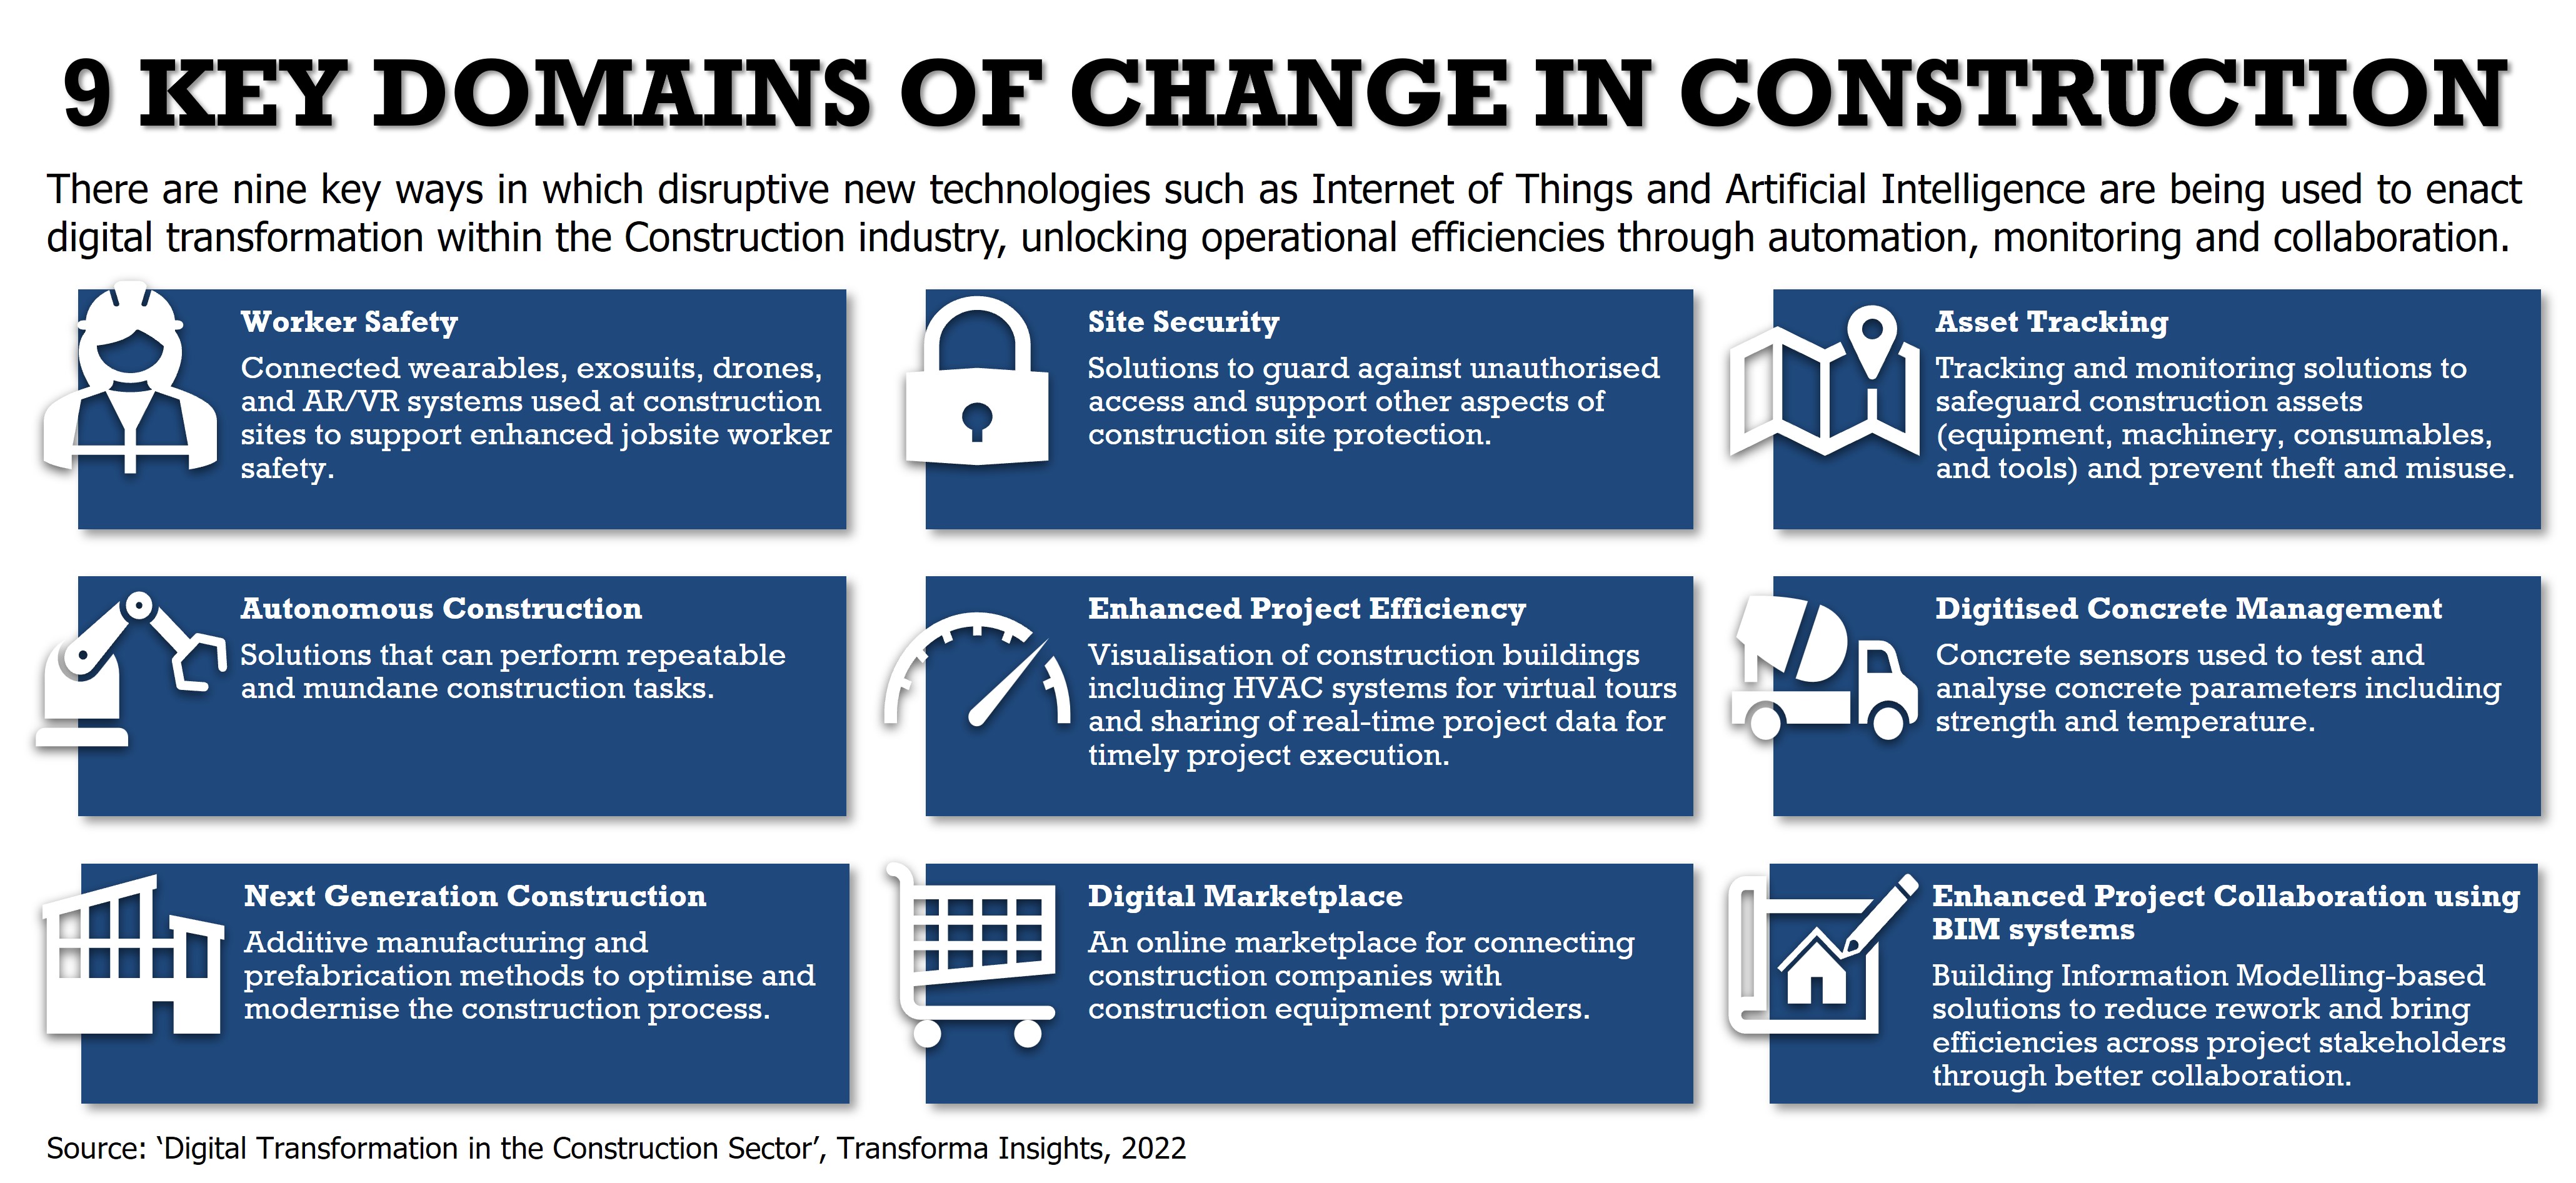 Domains of Change in Construction.jpg